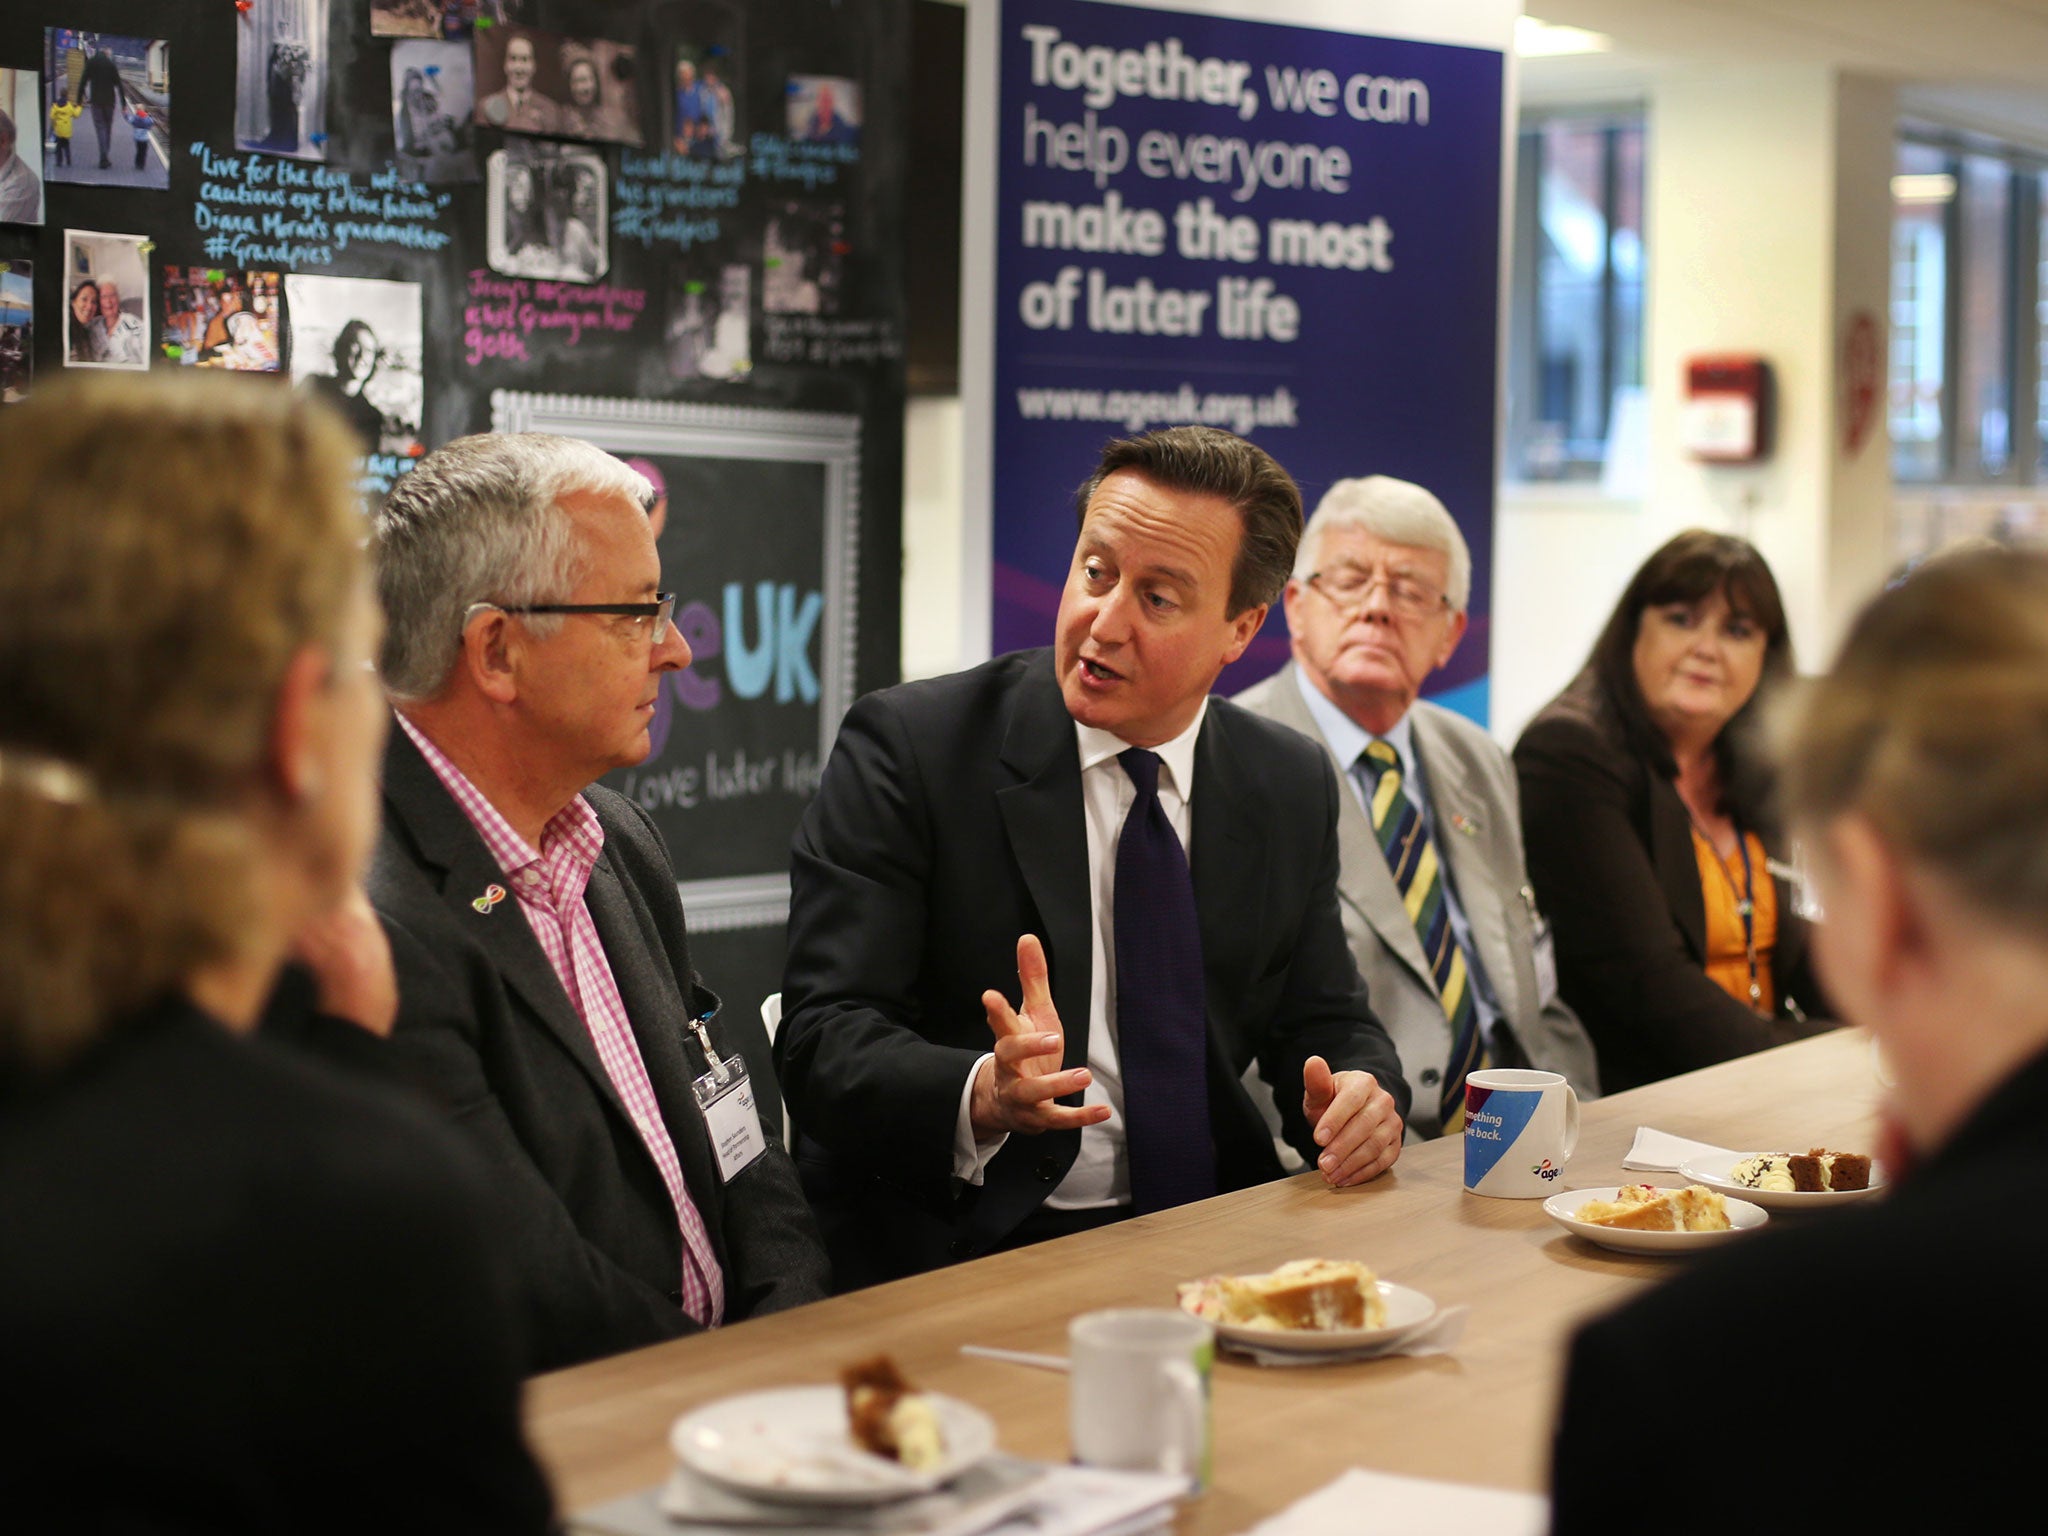 Prime Minister David Cameron talks to pensioners and older working people at Age UK headquarters on October 14, 2014 in London, England.